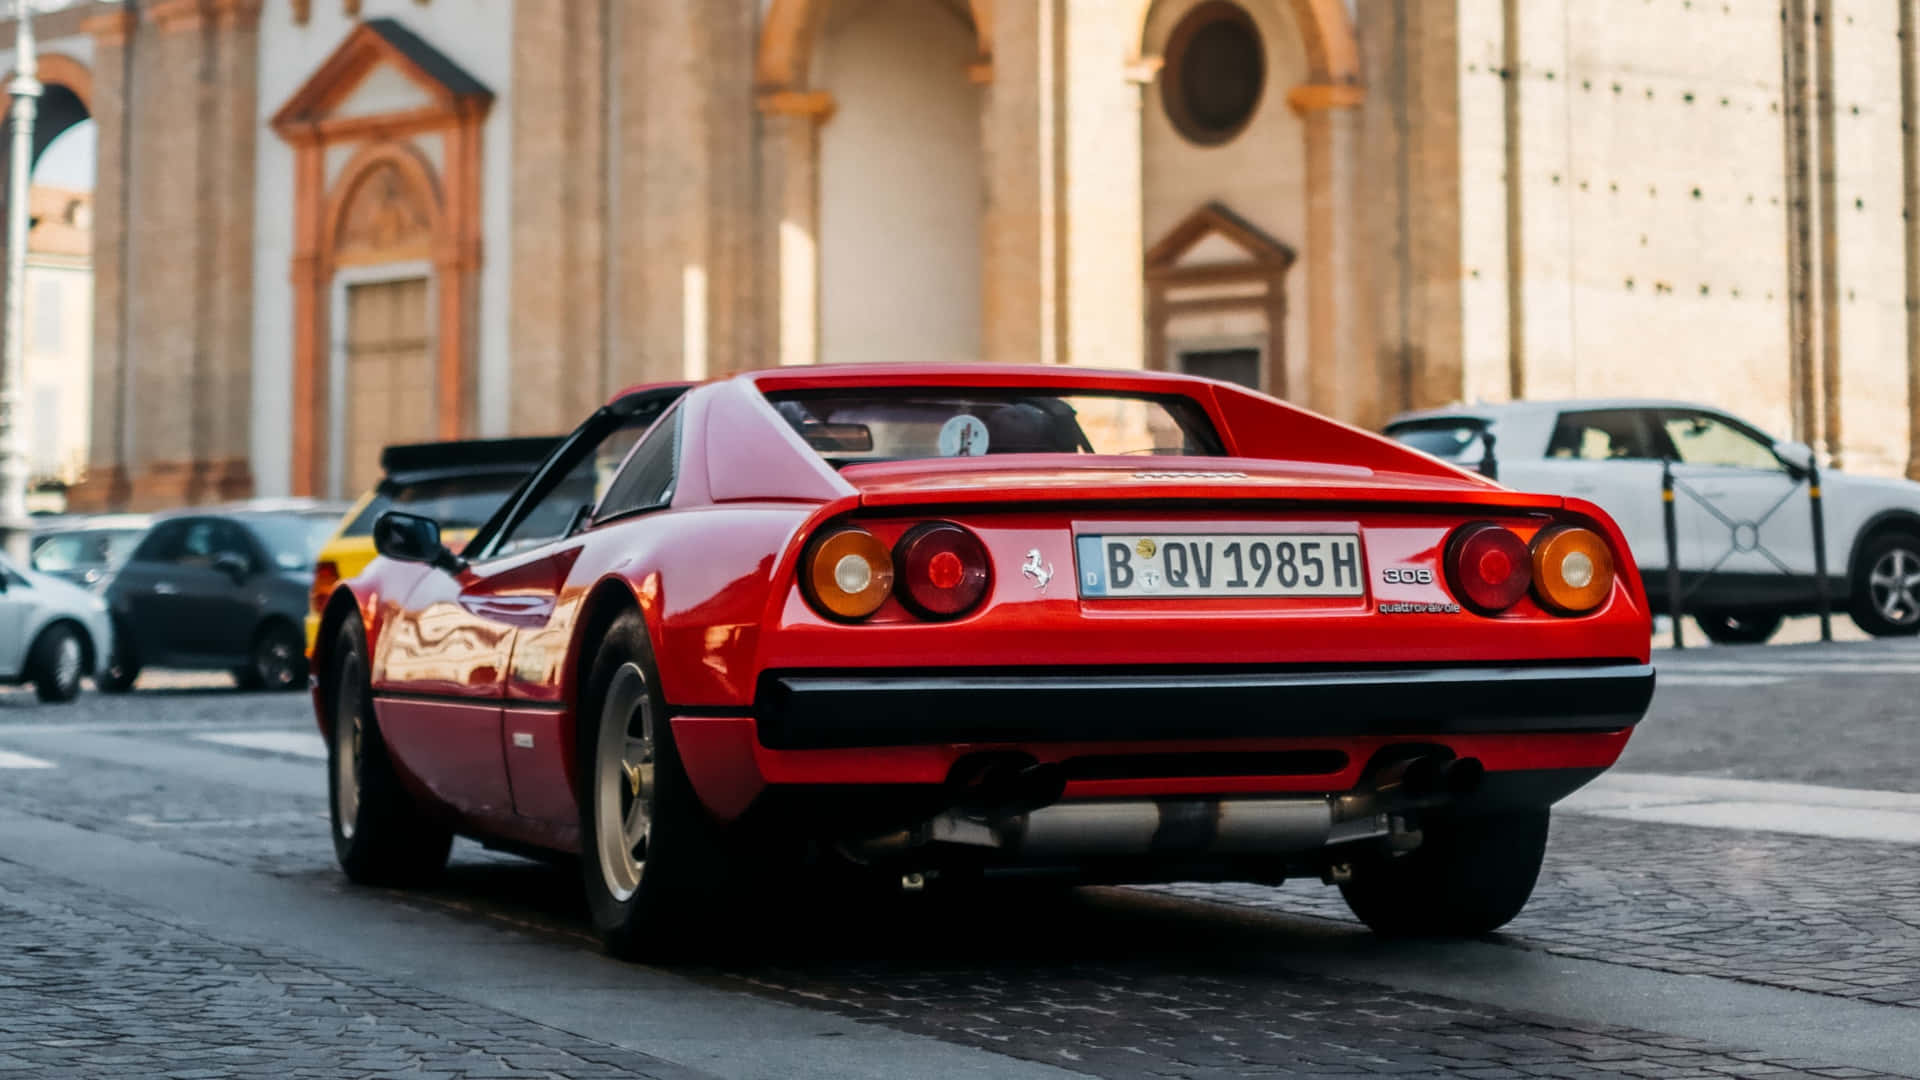 'Vintage style and power: the iconic Classic Ferrari.' Wallpaper